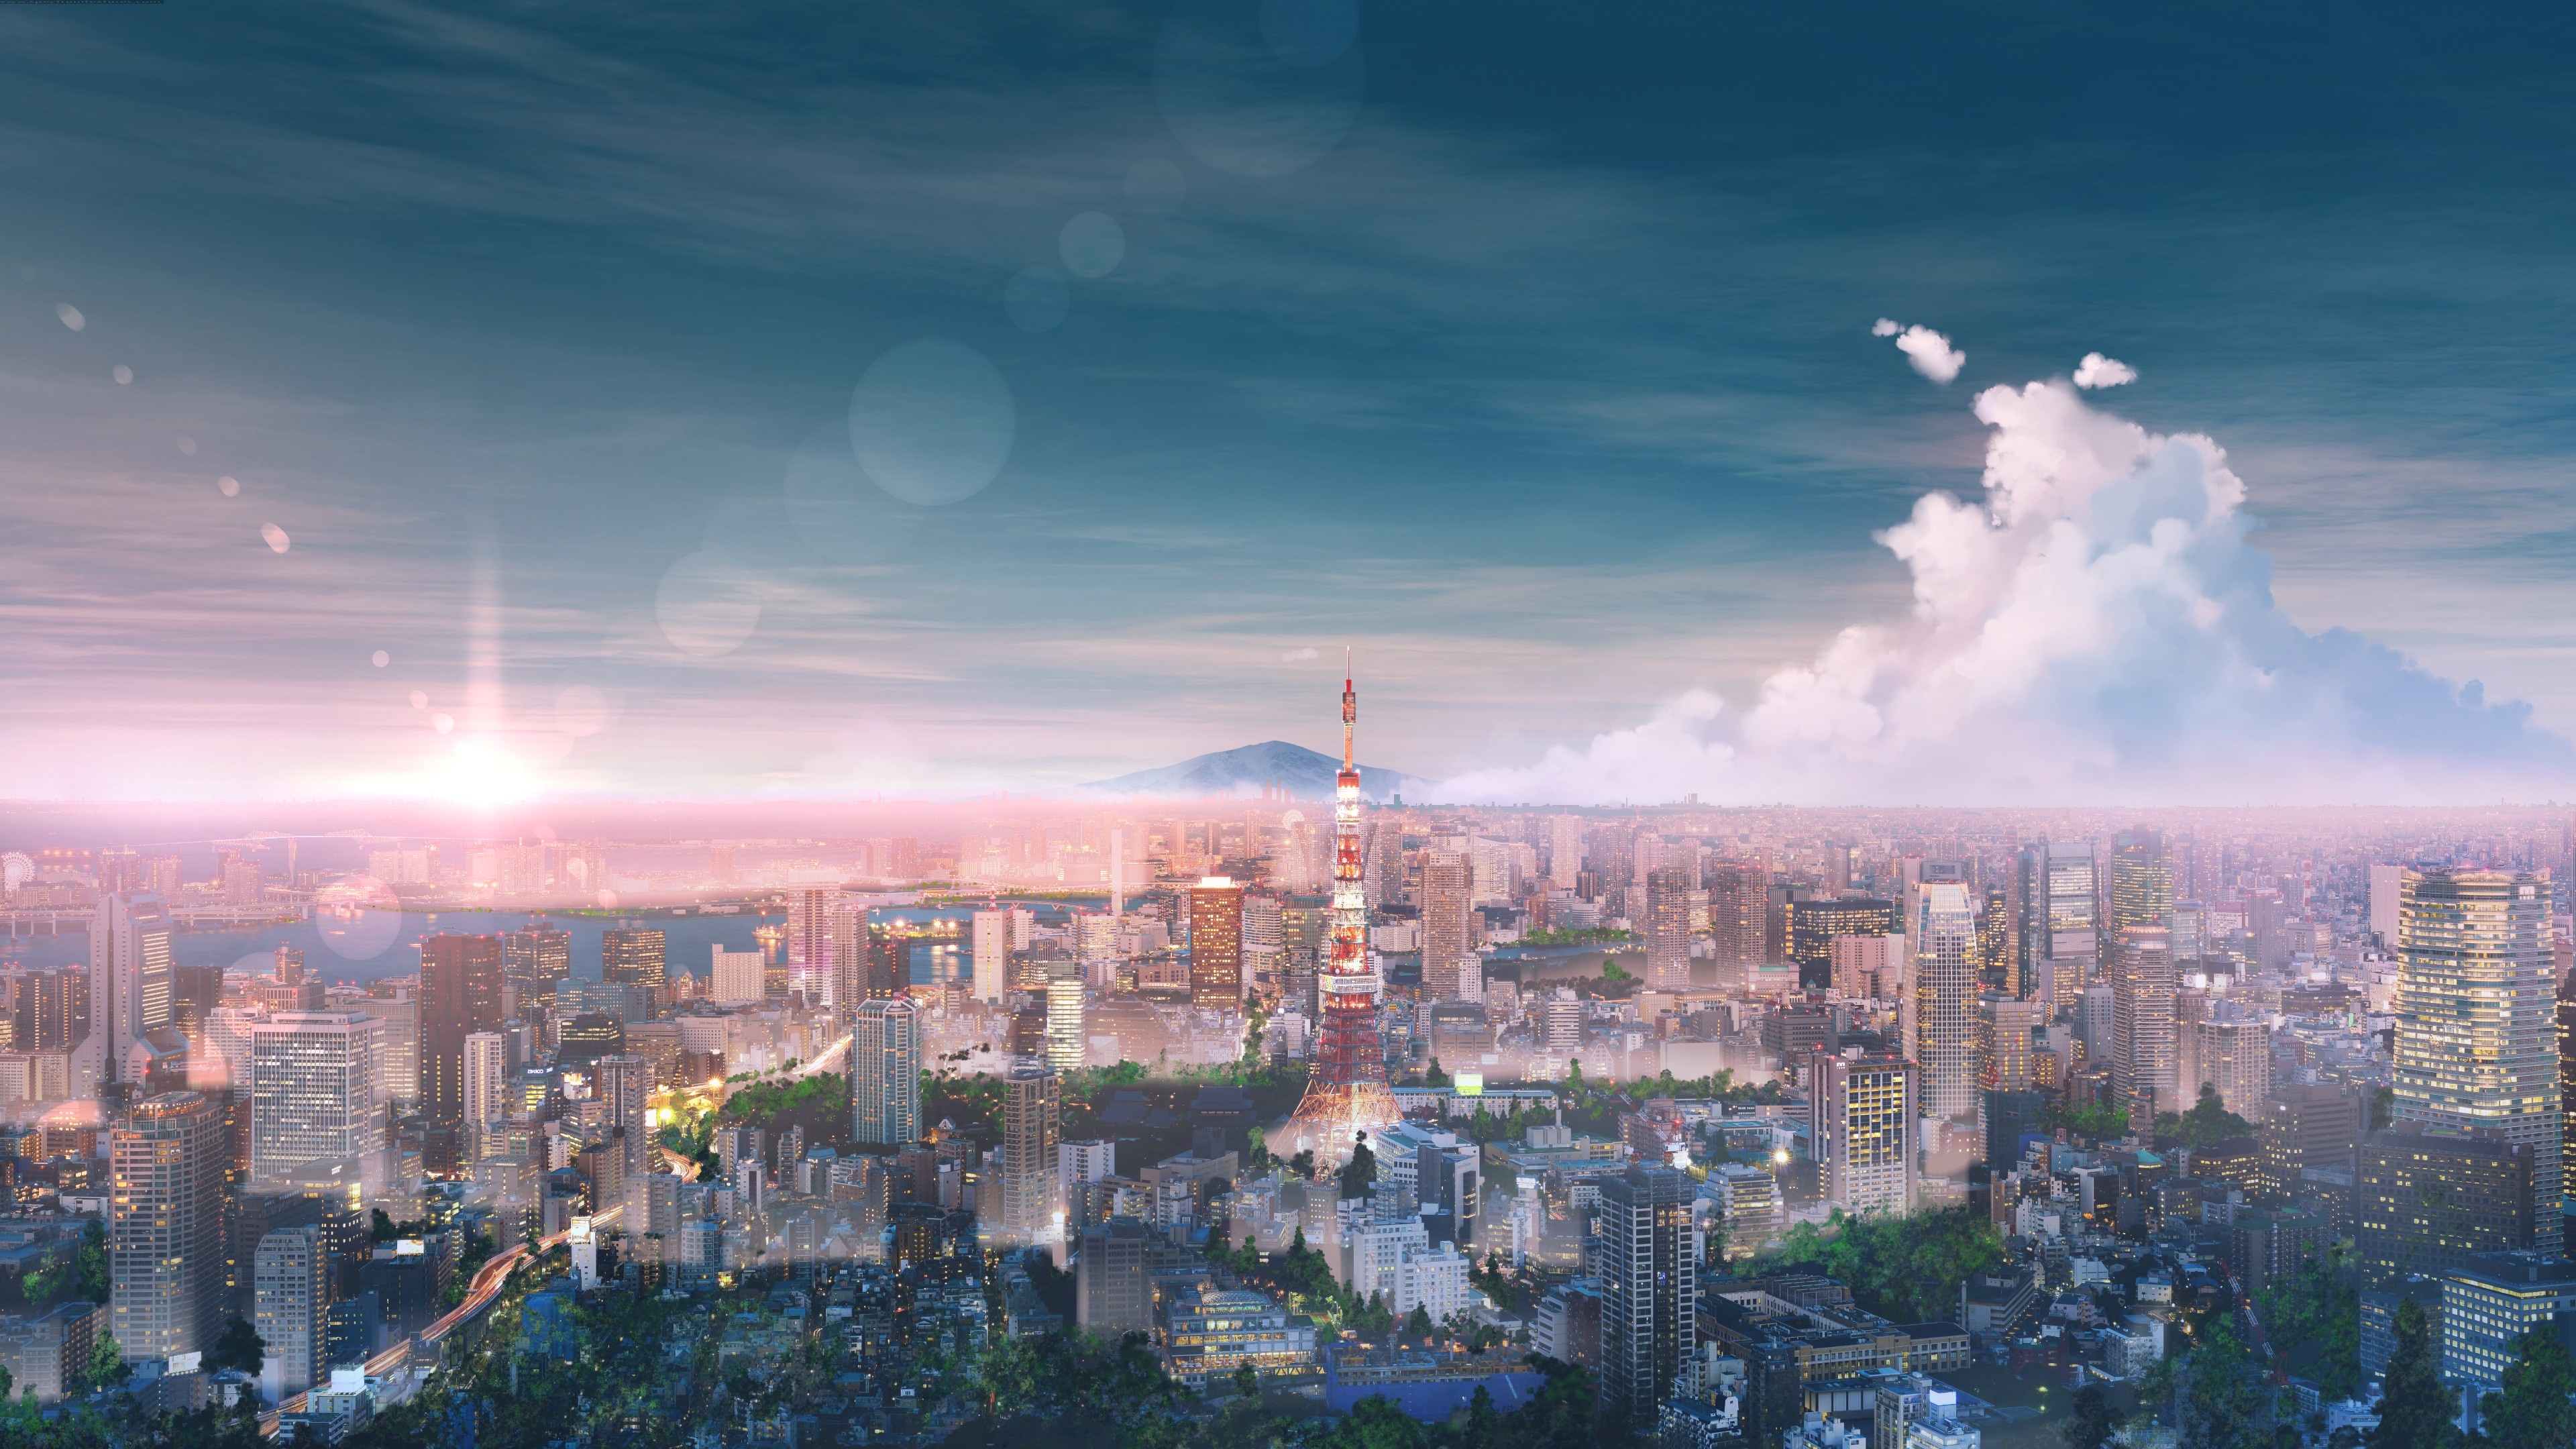 Cityscape: Tokyo in the style of Japanese anime, Skyscrapers at the sunset, Tokyo Tower. 3840x2160 4K Background.